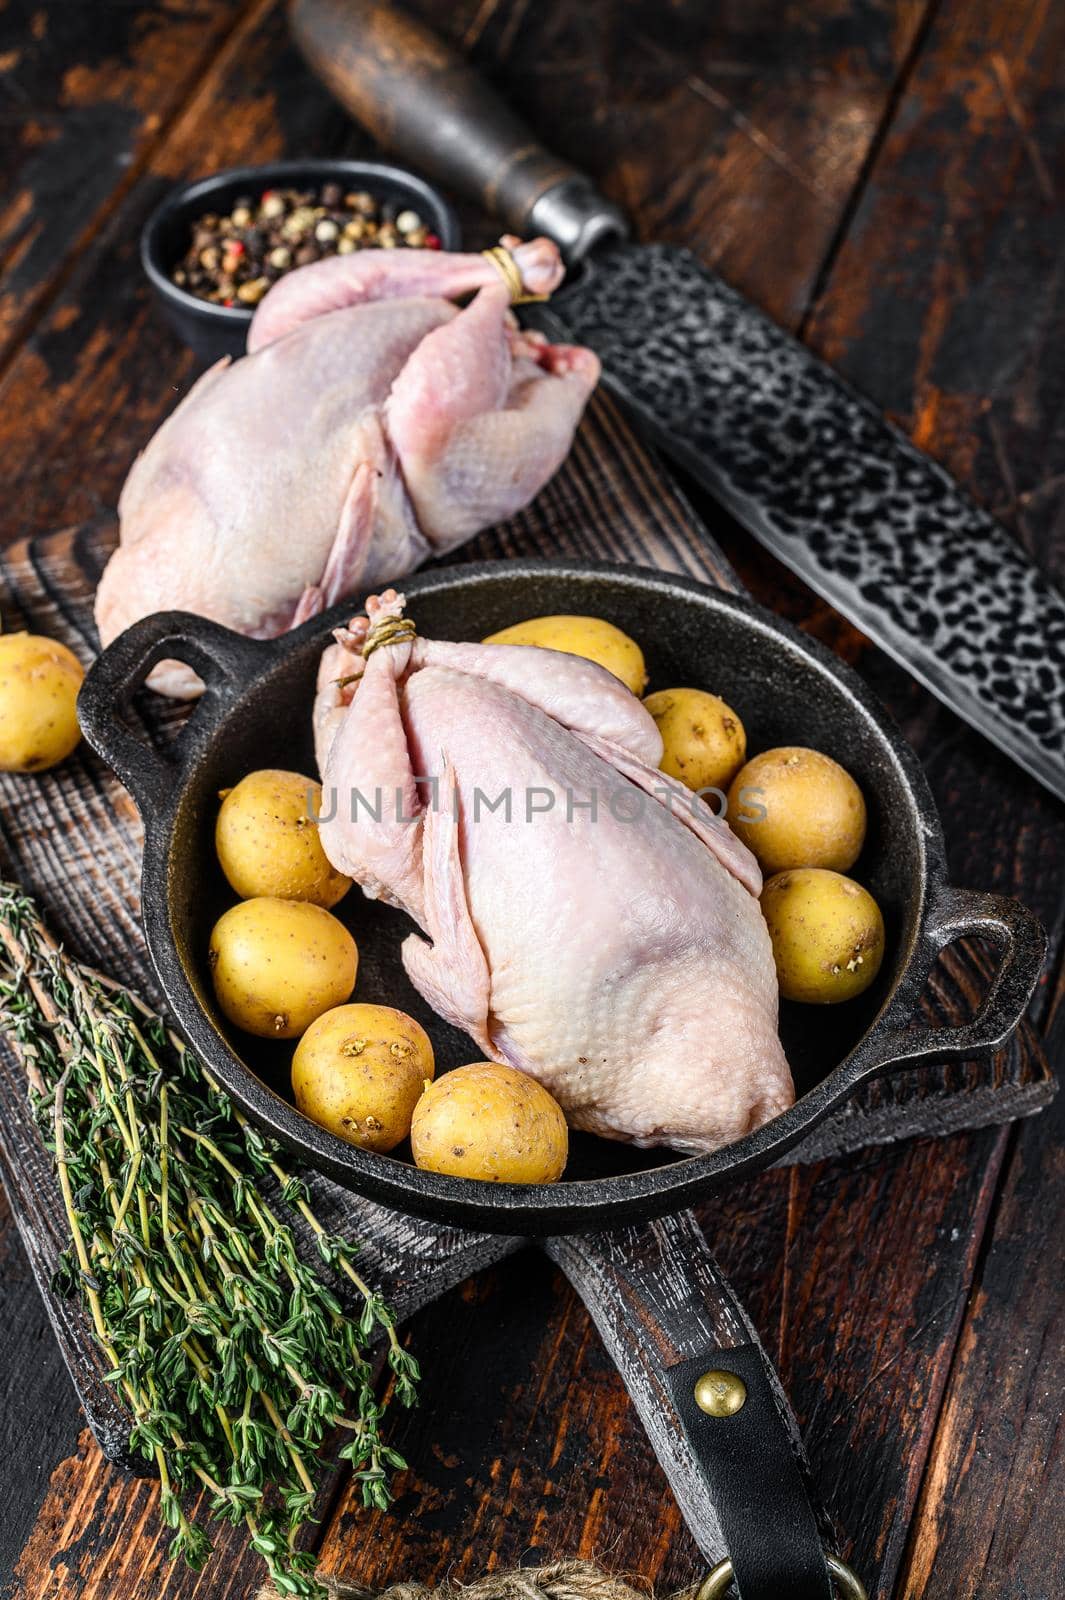 Uncooked raw quails ready for cooking in a pan. Dark wooden background. Top view.